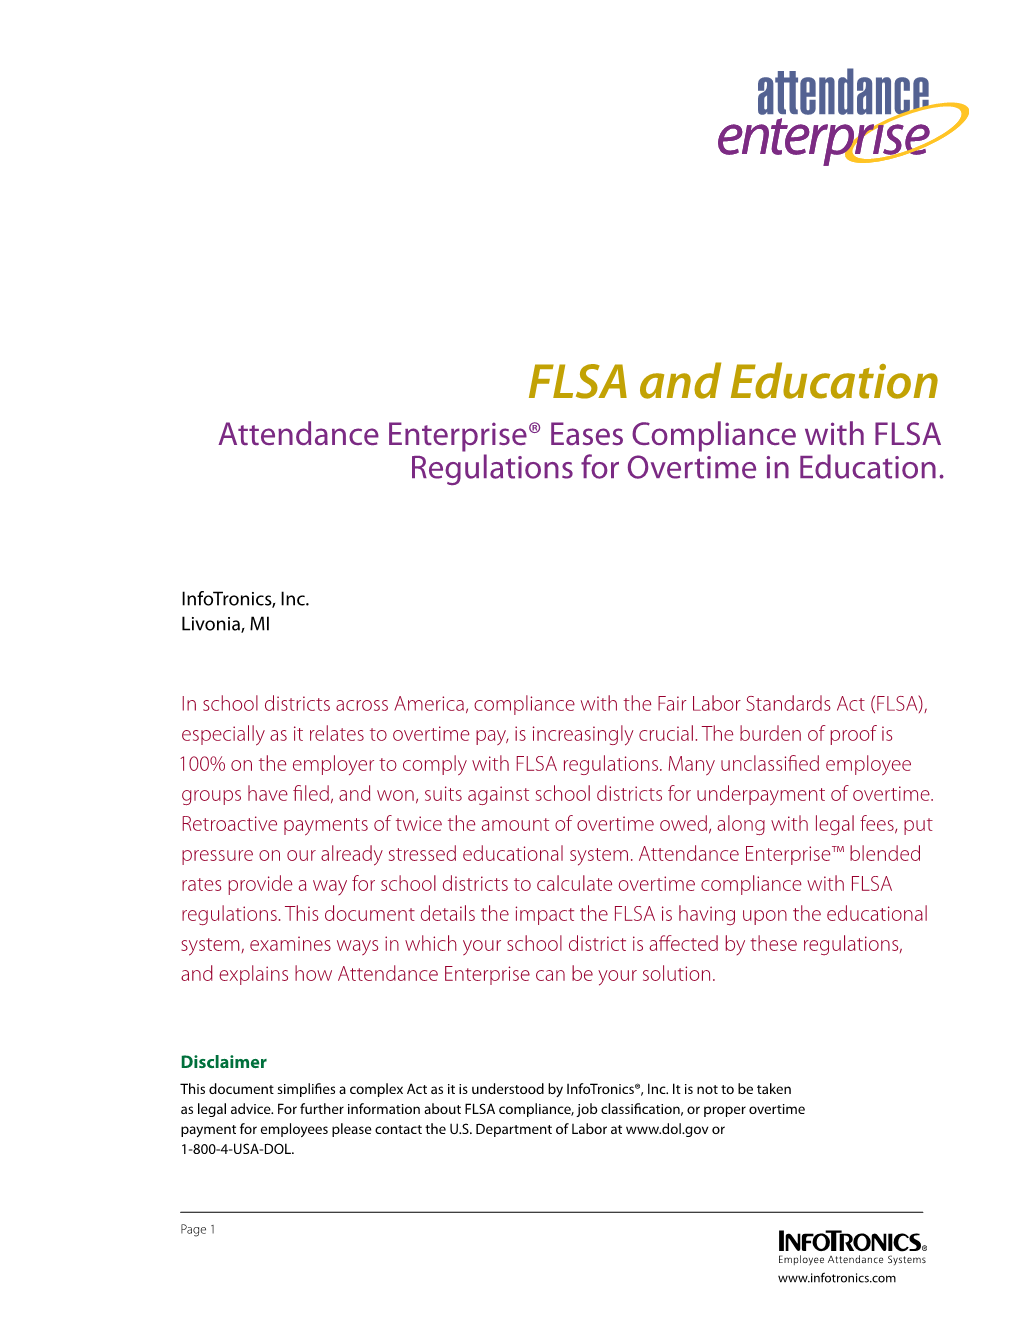 FLSA and Education Attendance Enterprise® Eases Compliance with FLSA Regulations for Overtime in Education